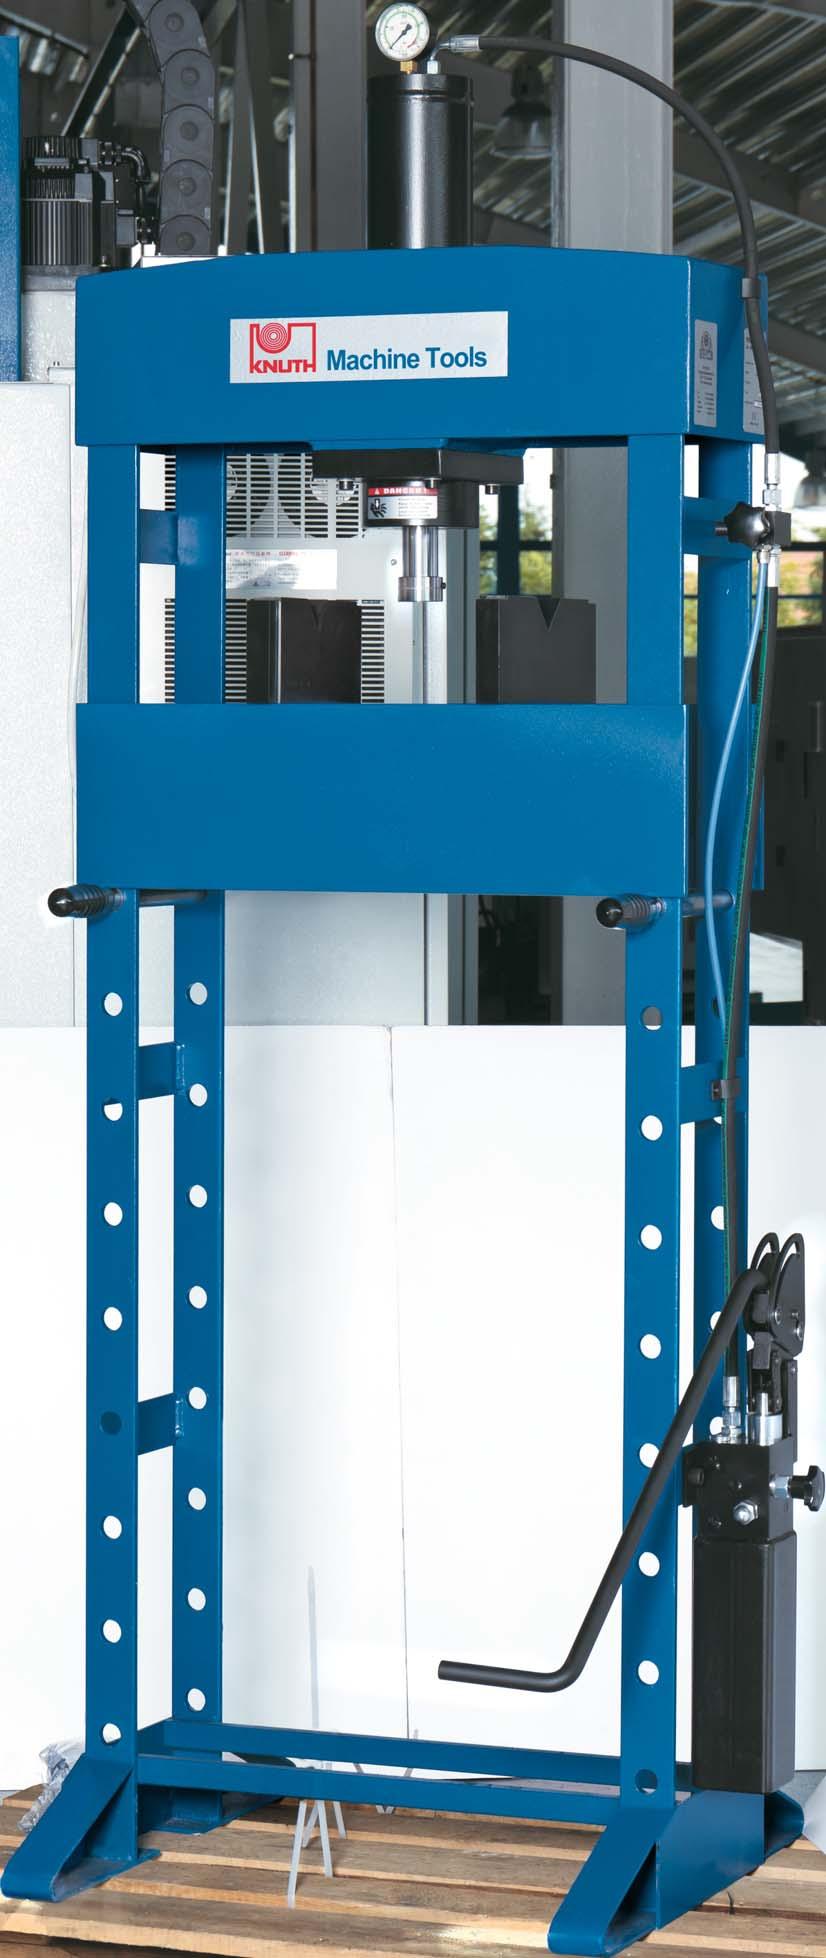 design, but is easy to handle with adjustable height standard multi-function die featuring a large belt width - for straightening flat materials